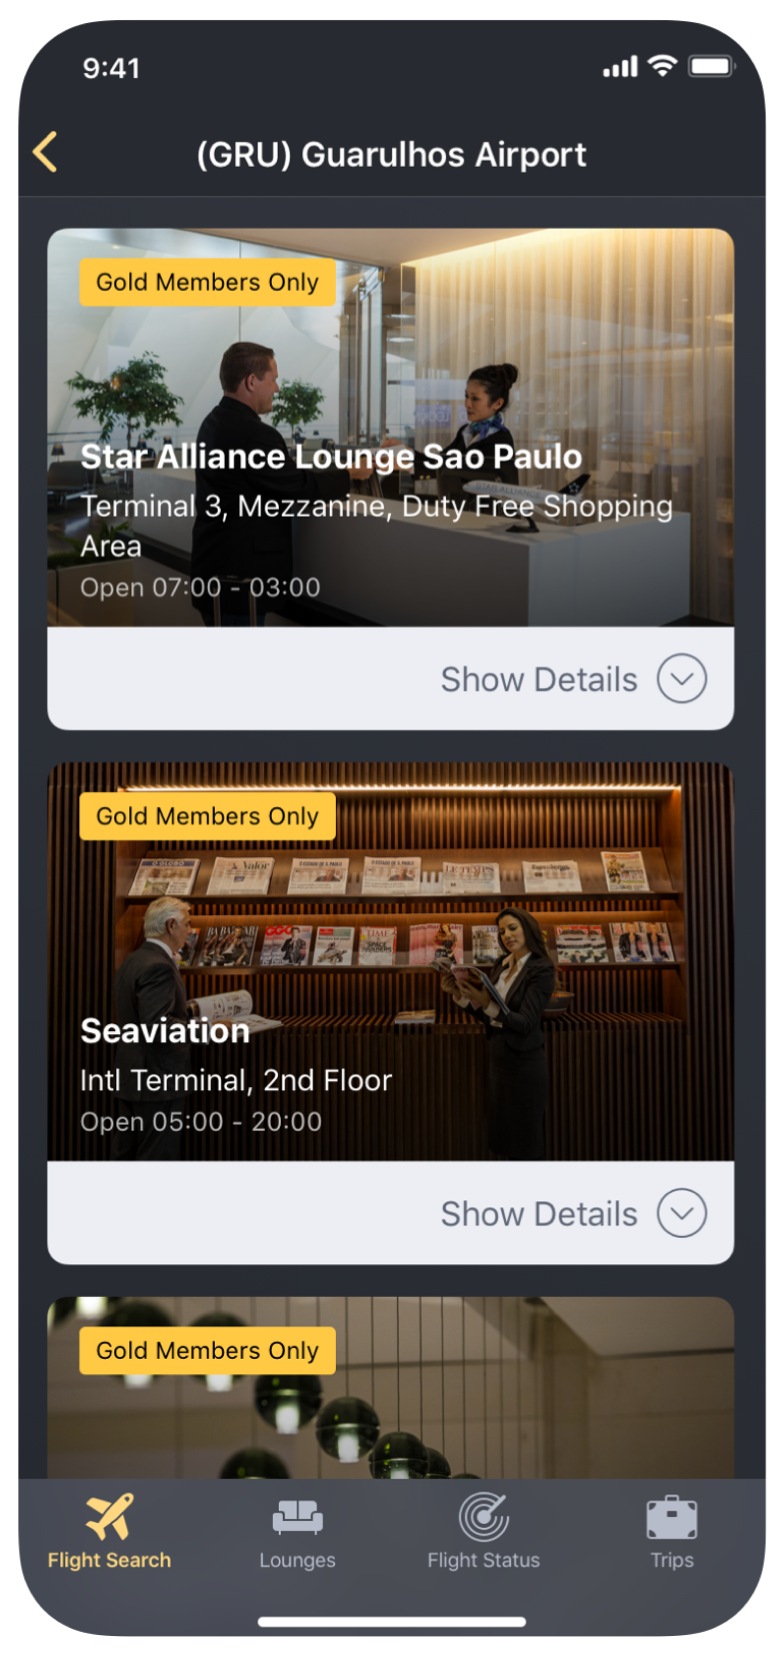 Nagarro developed app for lounge information with Star Alliance